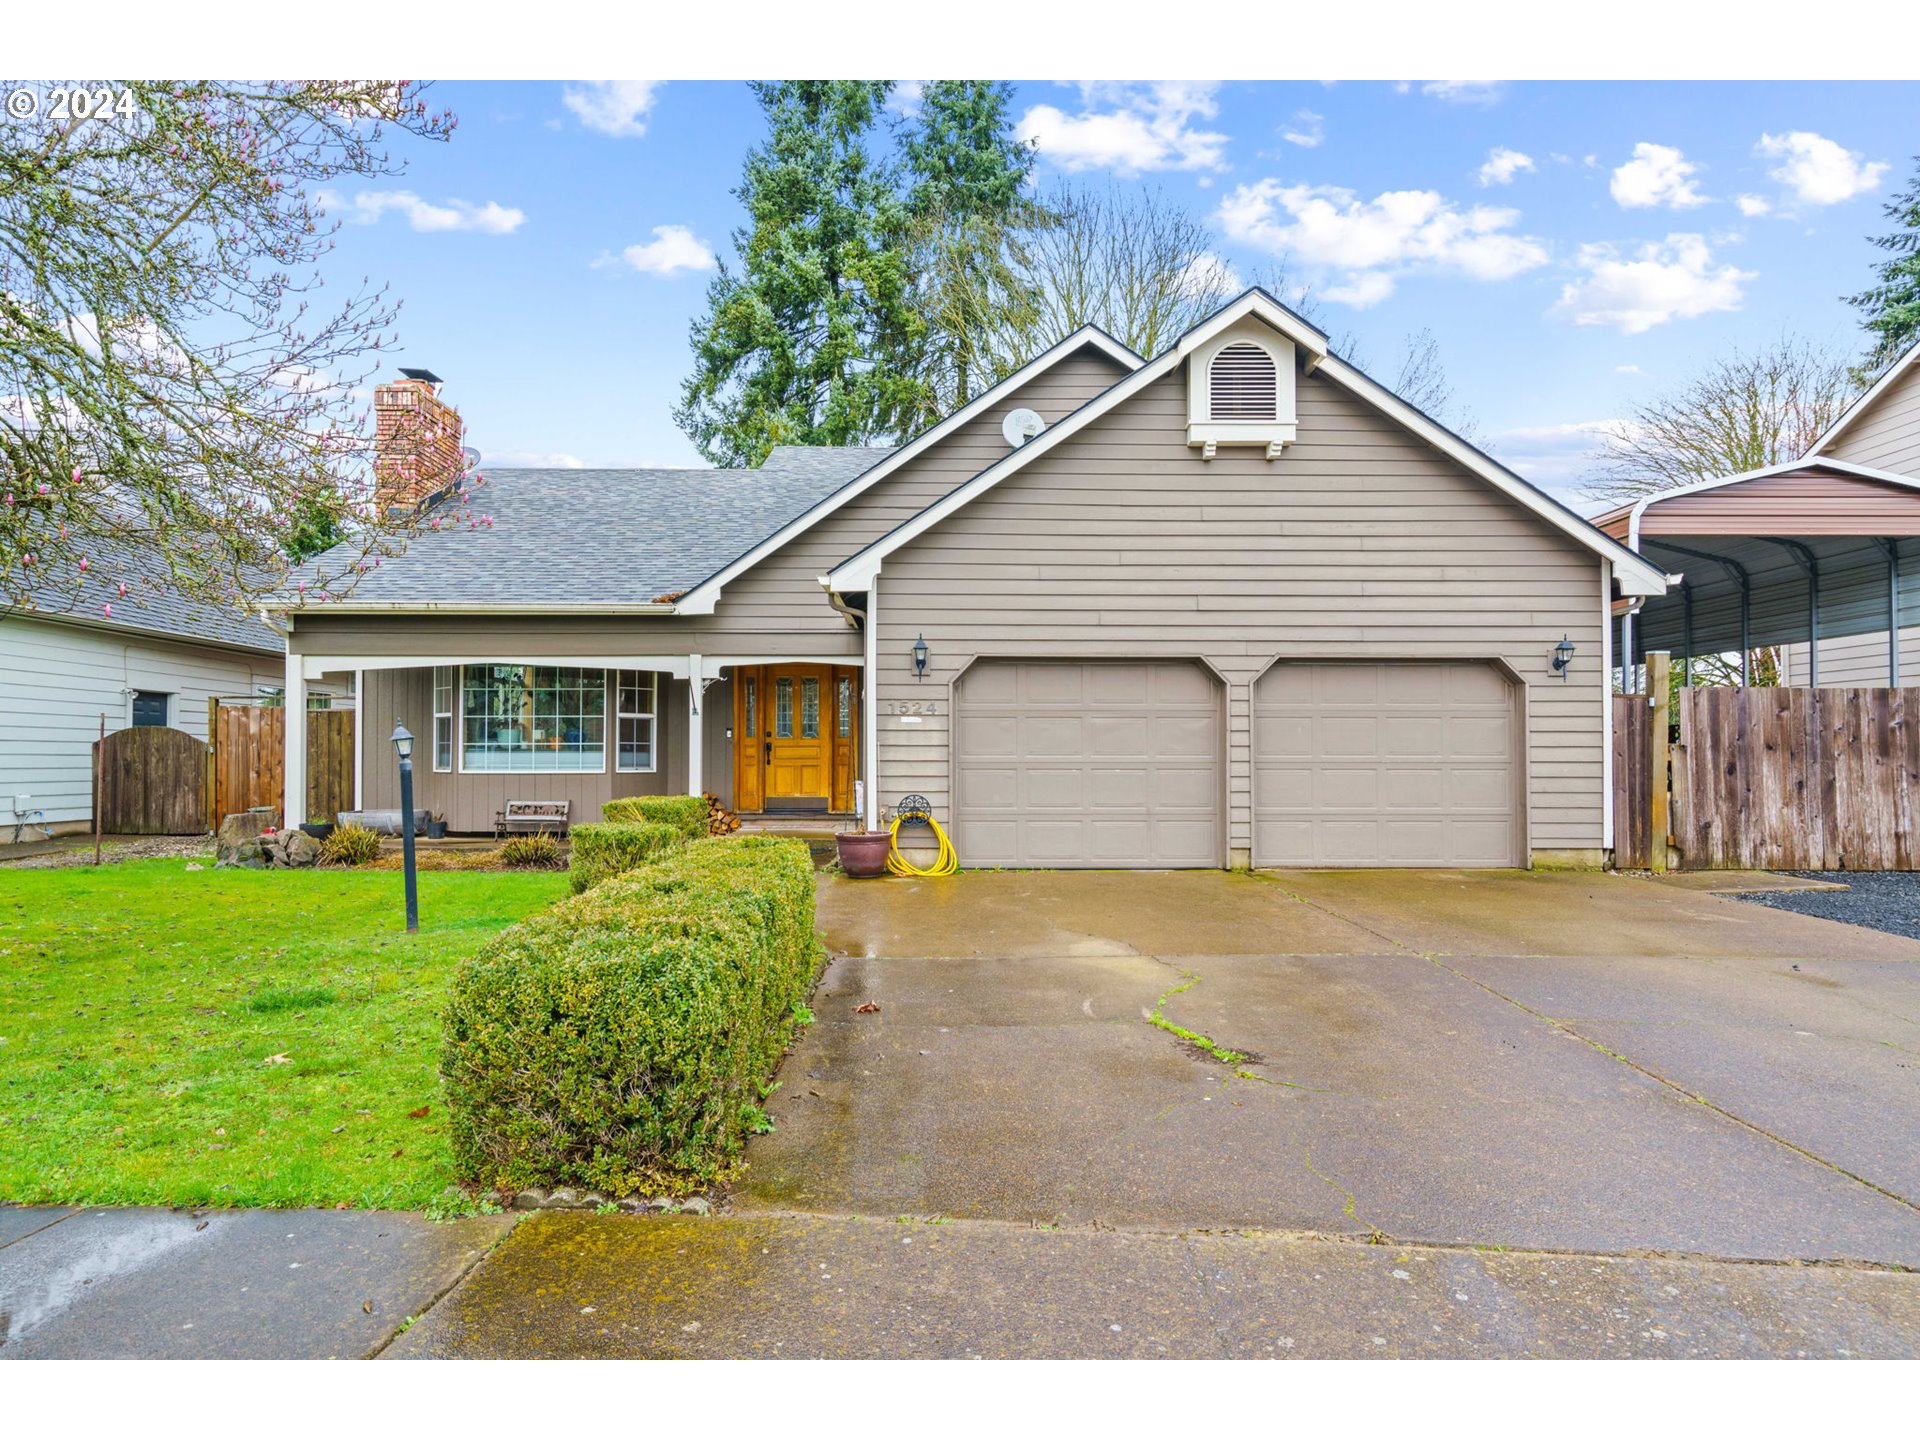 1524 W 13TH AVE, Junction City, OR 